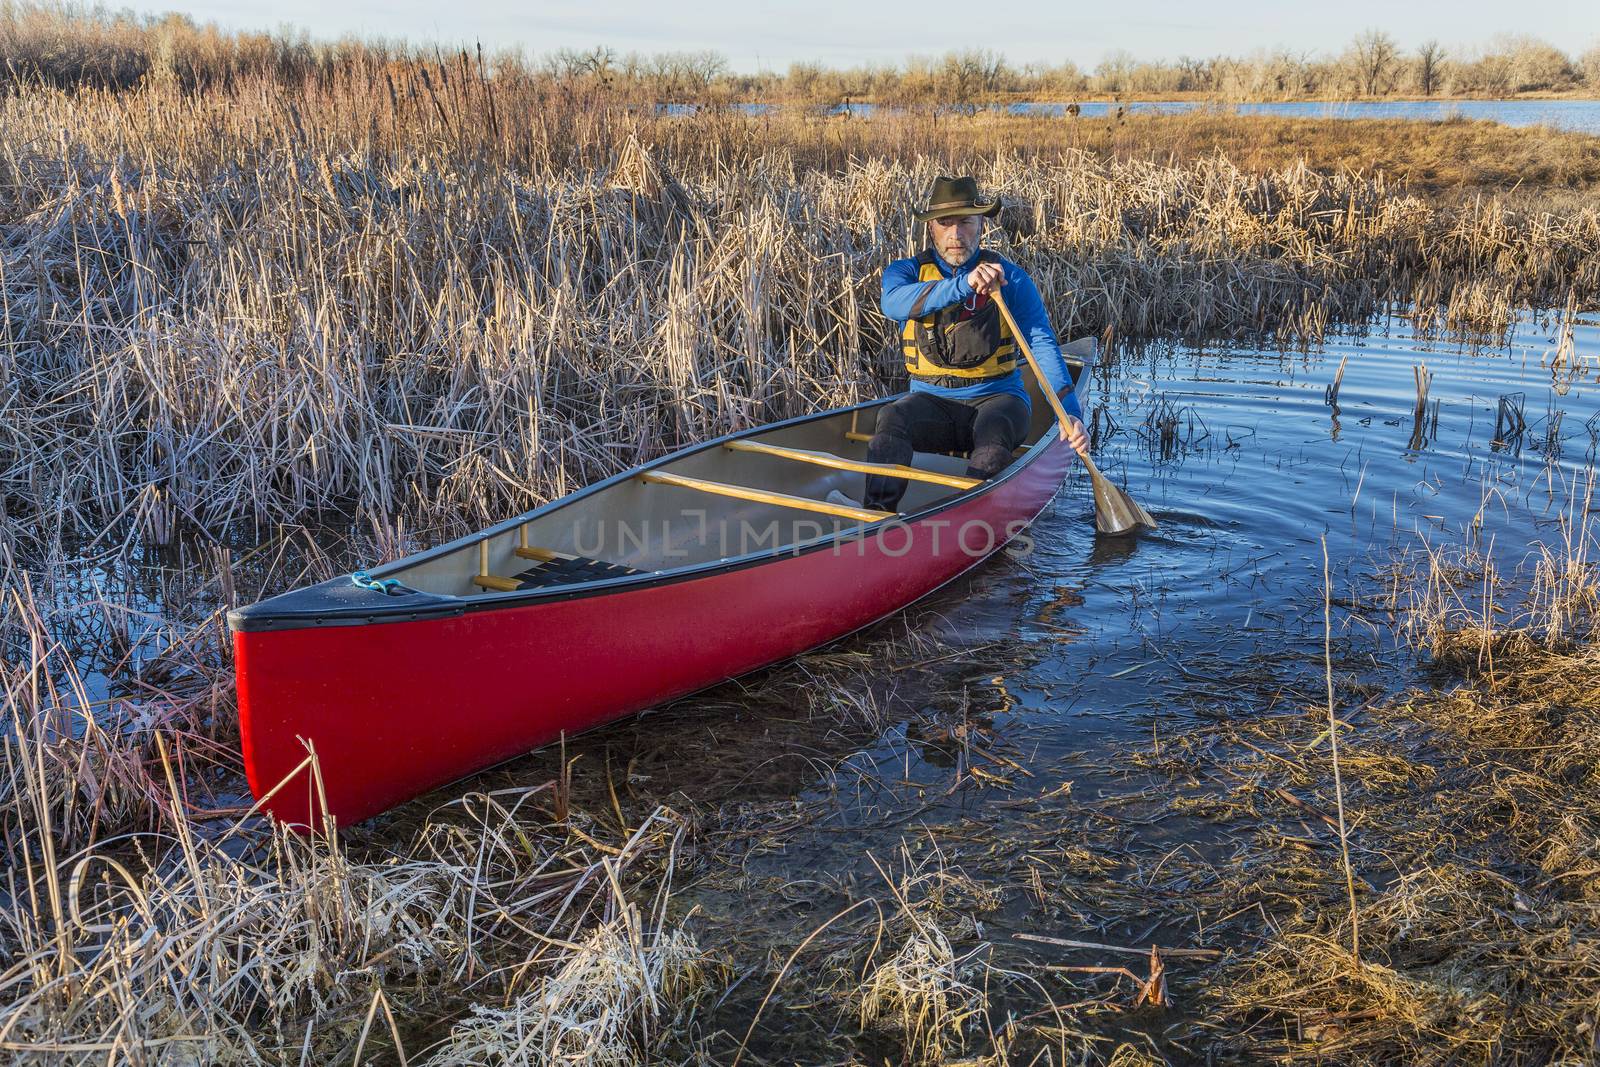 senior male paddling a red canoe through a swamp, early spring